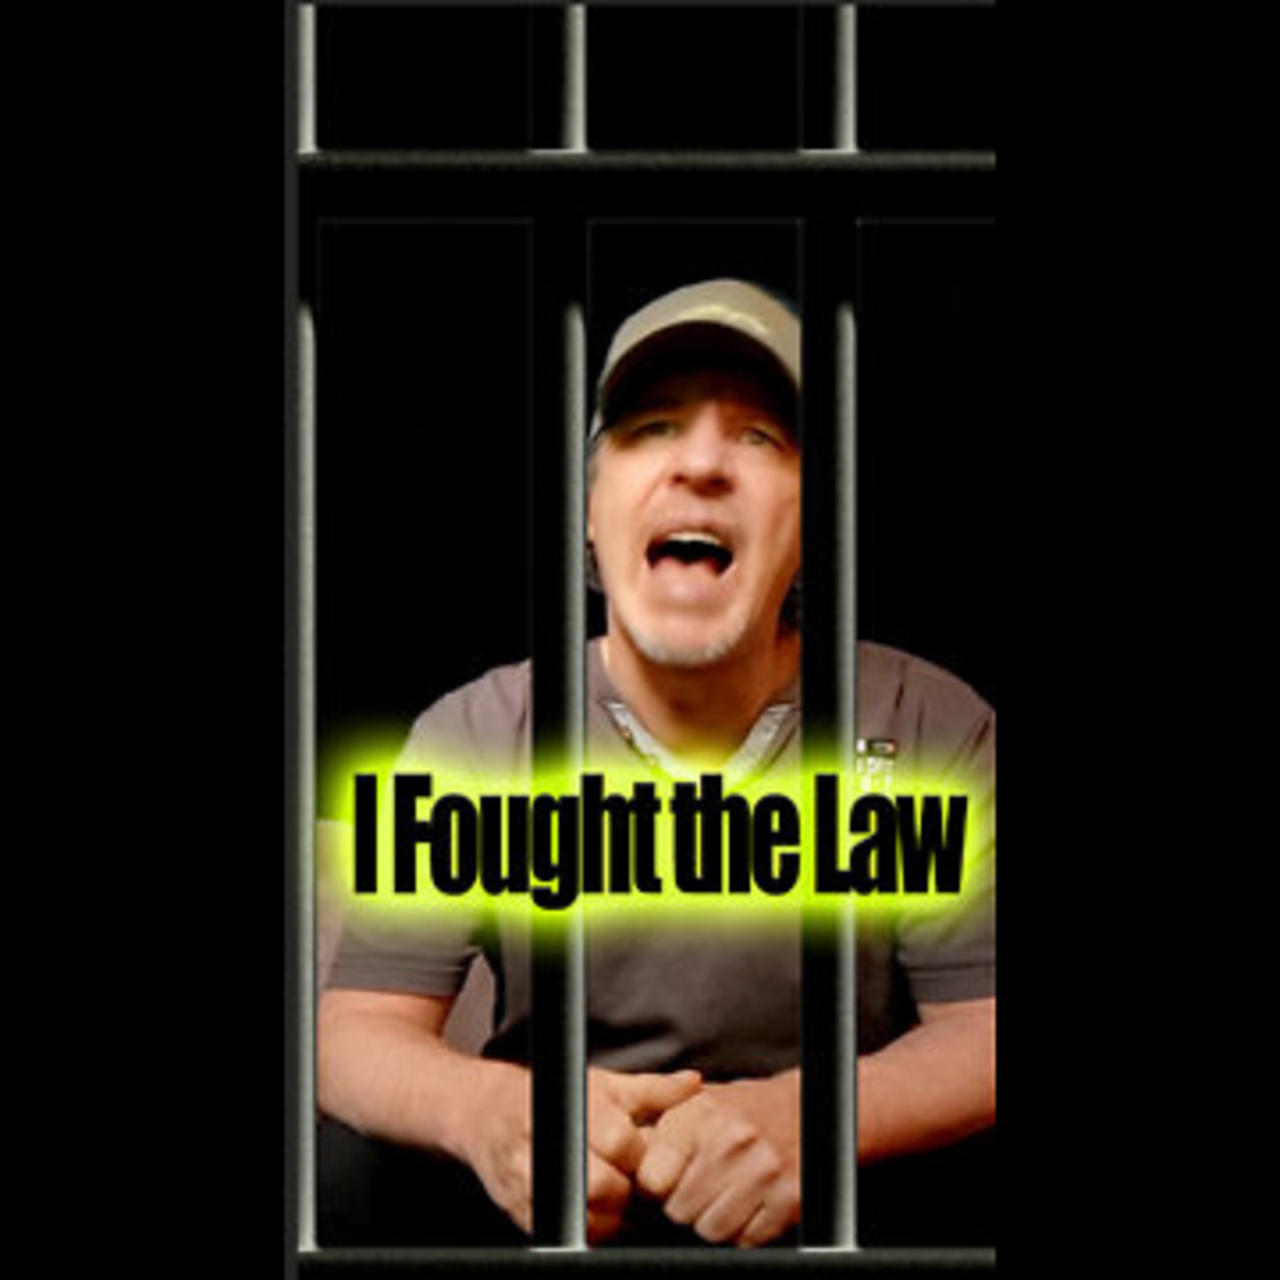 Ronny - I Fought The Law